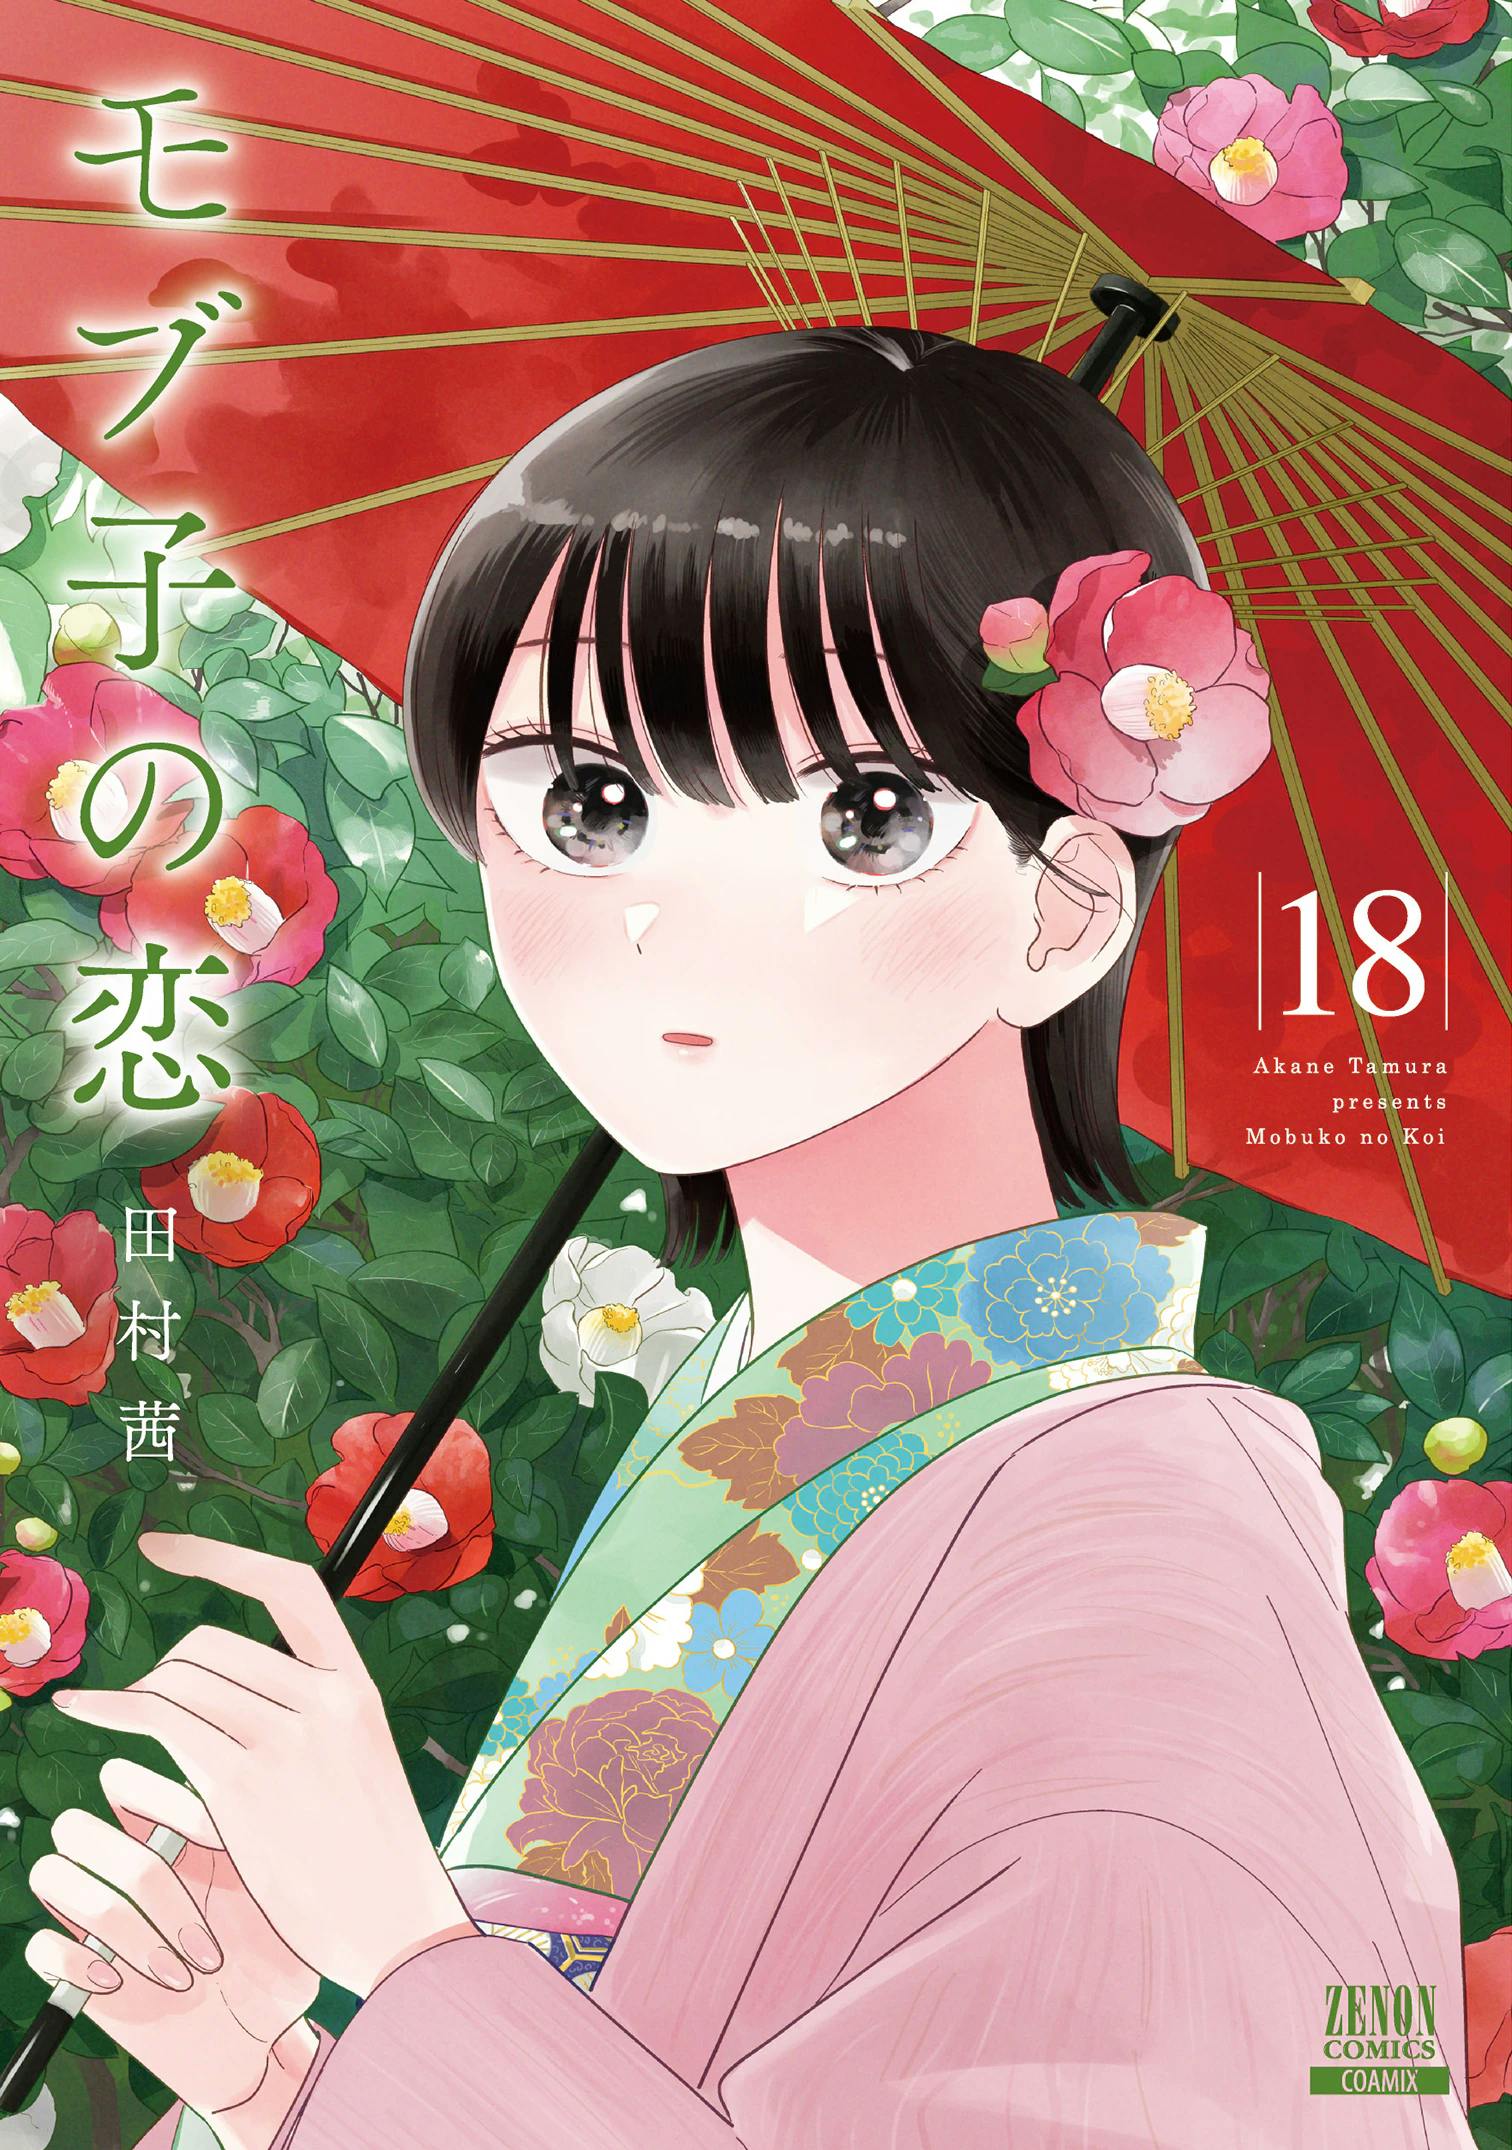 A live-action movie is in progress!! “Mobuko no Koi” Volume 18 will be released on January 19th!!